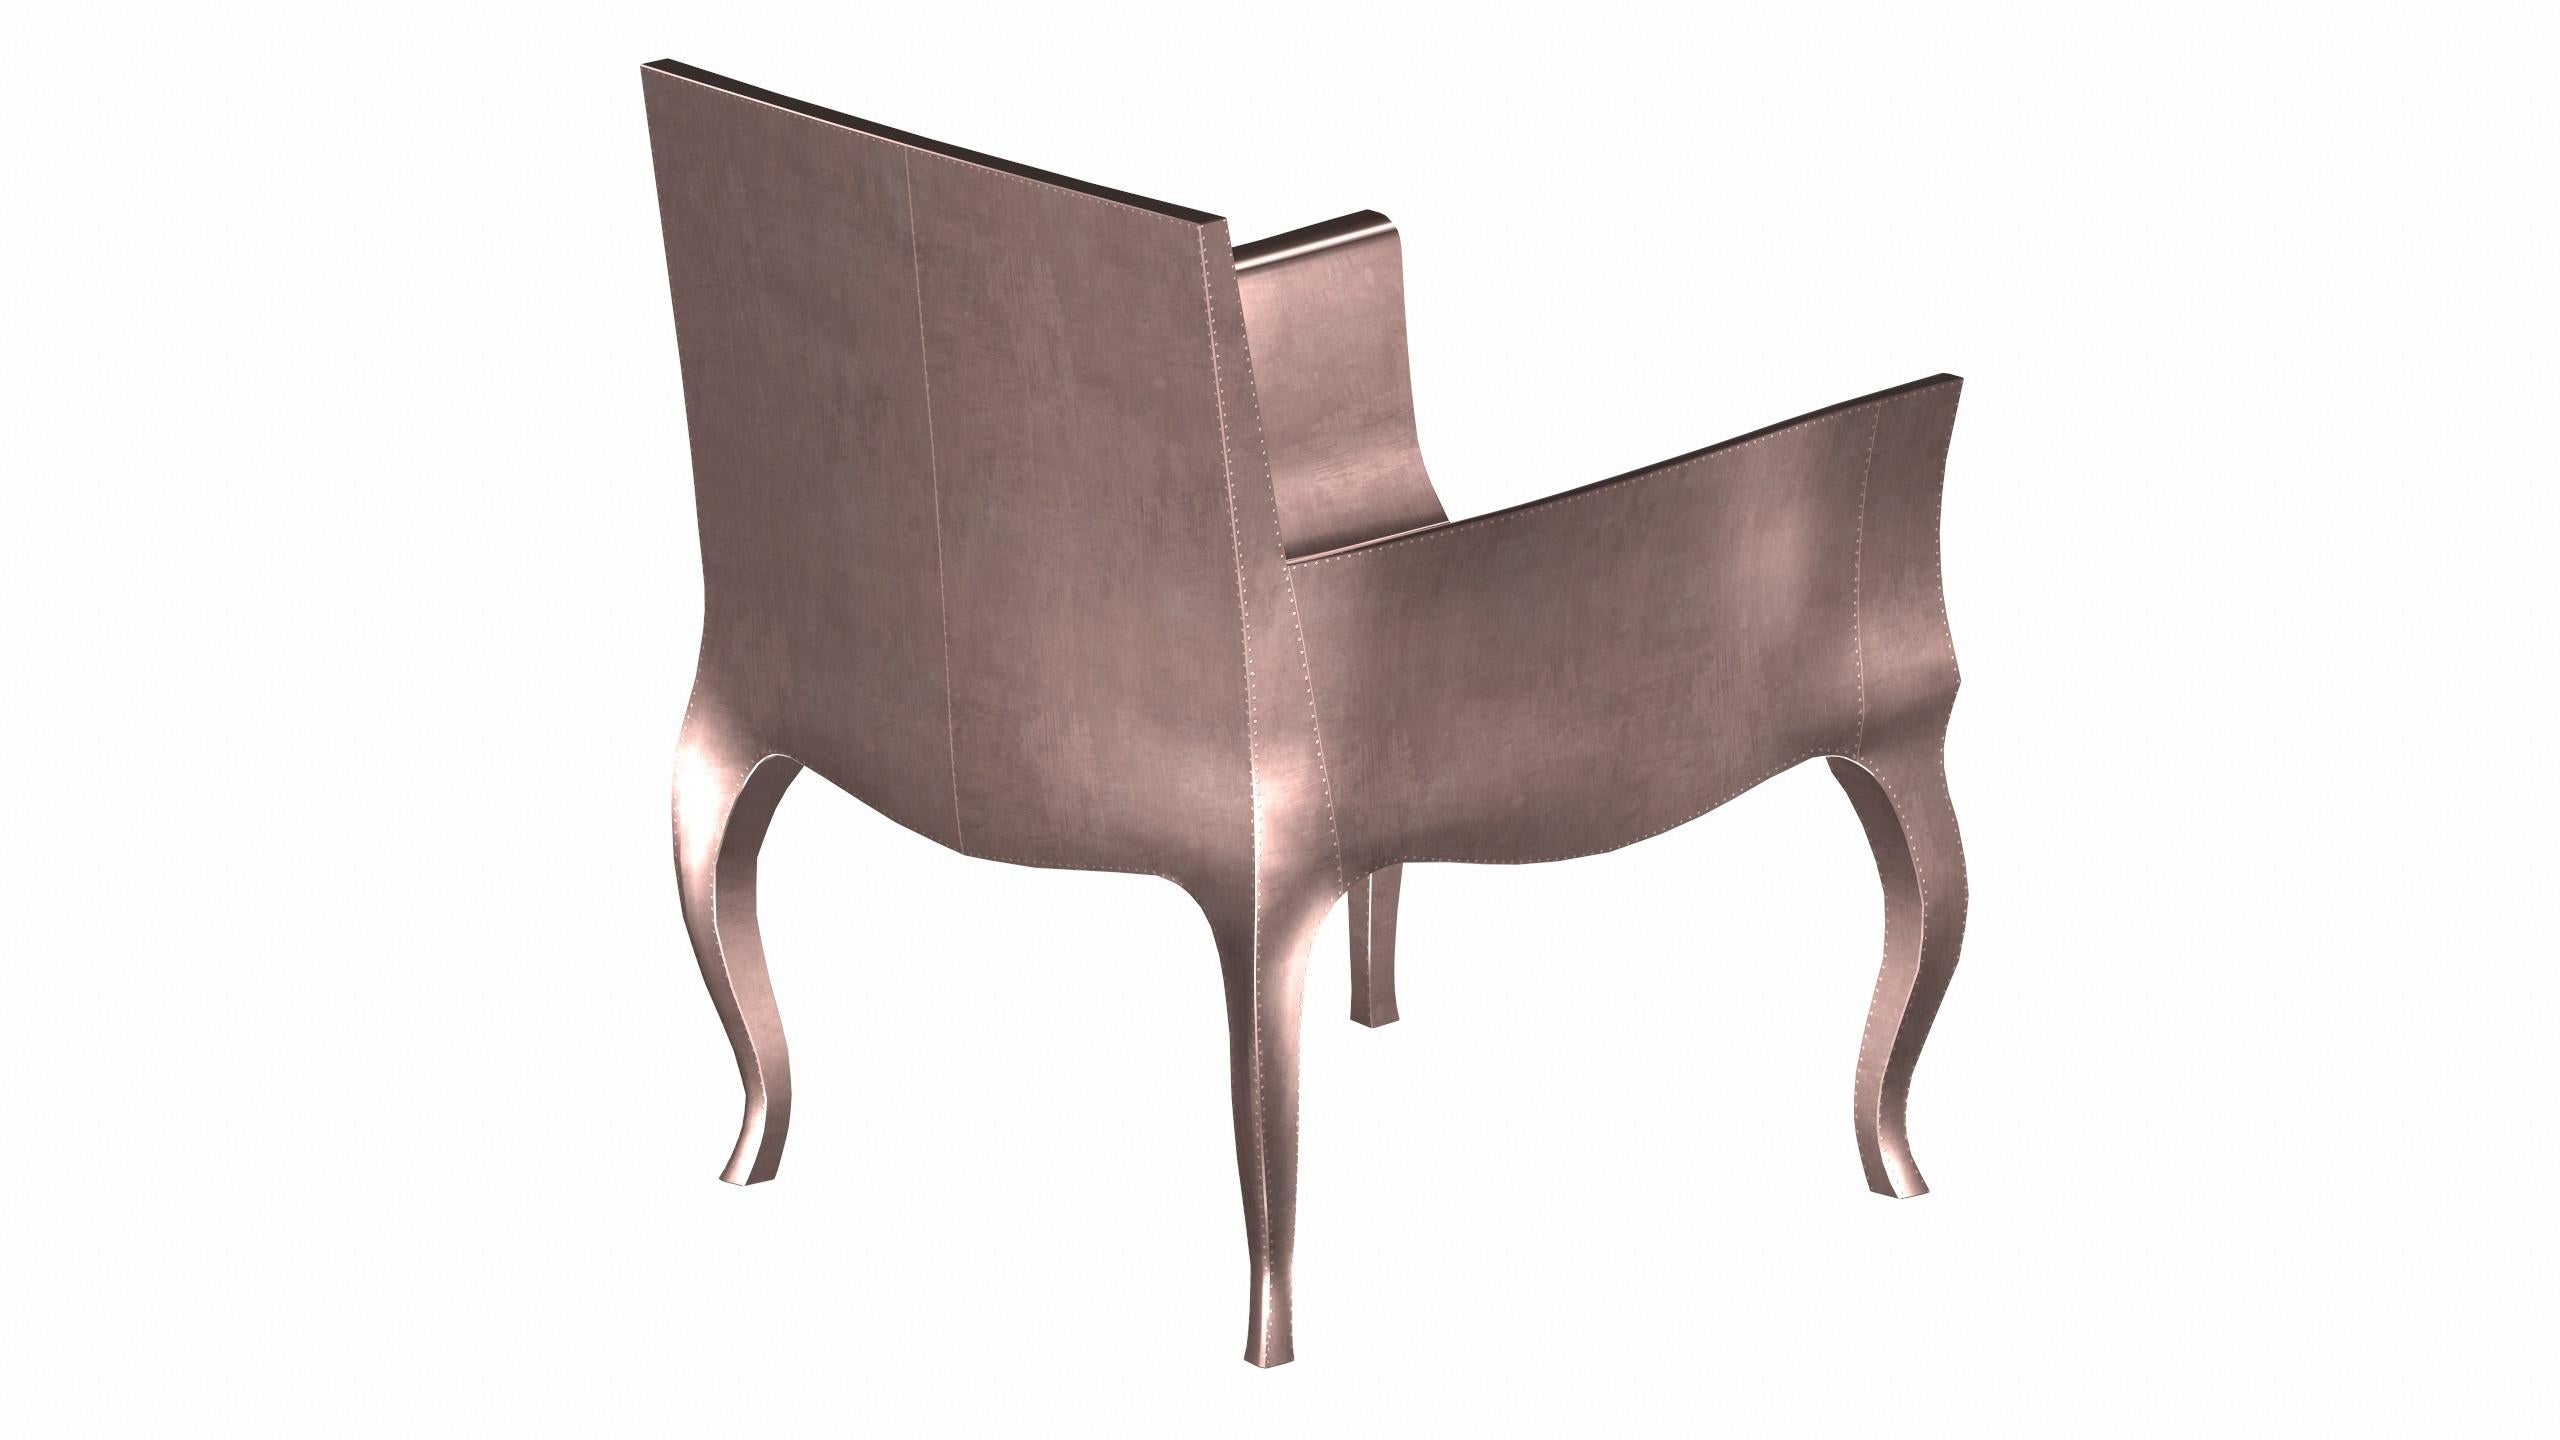 Indian Art Deco Chairs in Smooth Copper by Paul Mathieu for S. Odegard For Sale